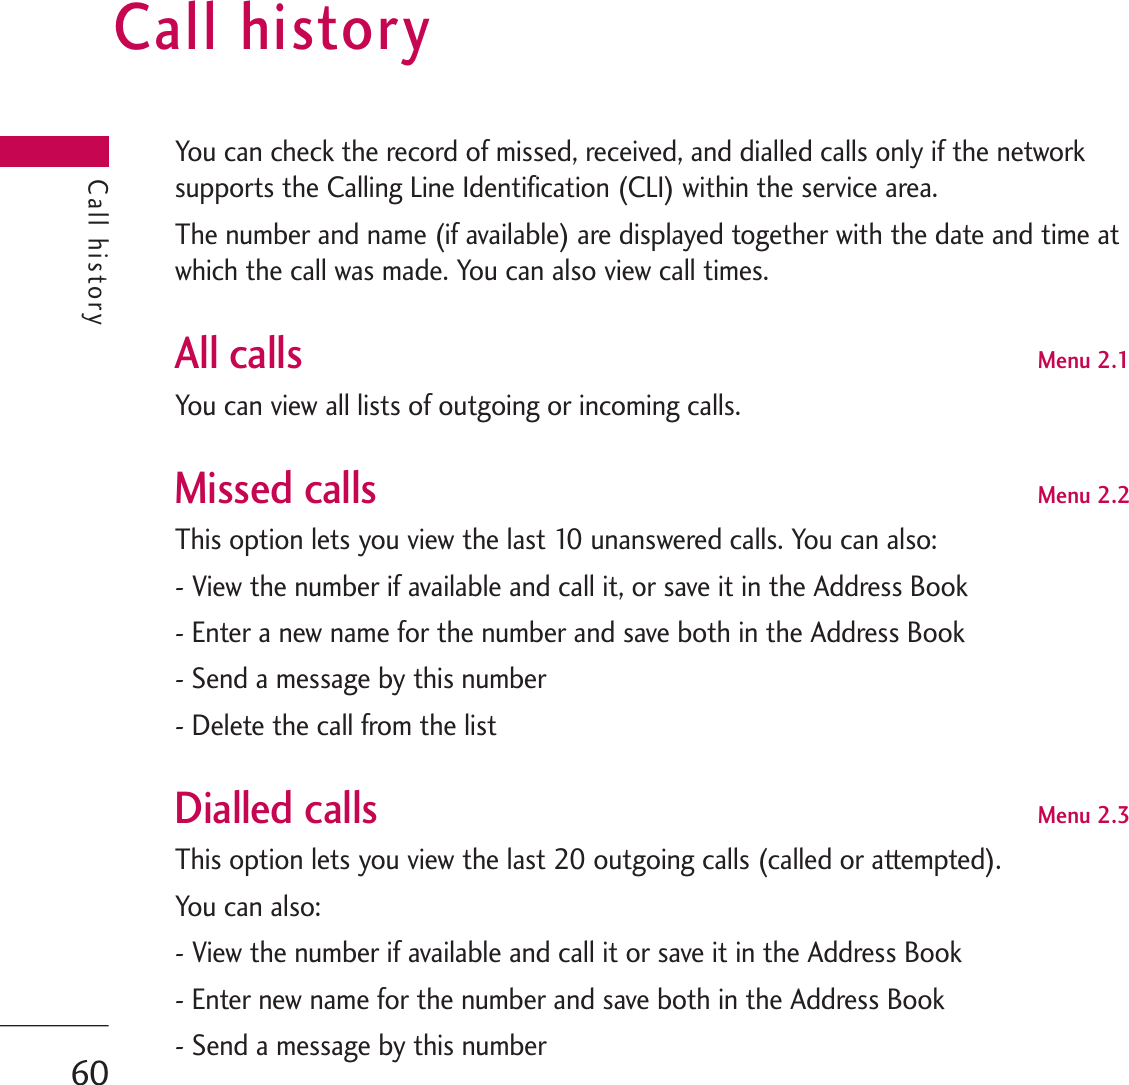 Call historyYou can check the record of missed, received, and dialled calls only if the networksupports the Calling Line Identification (CLI) within the service area.The number and name (if available) are displayed together with the date and time atwhich the call was made. You can also view call times.All calls Menu 2.1You can view all lists of outgoing or incoming calls.Missed calls Menu 2.2This option lets you view the last 10 unanswered calls. You can also:- View the number if available and call it, or save it in the Address Book- Enter a new name for the number and save both in the Address Book- Send a message by this number- Delete the call from the listDialled calls Menu 2.3This option lets you view the last 20 outgoing calls (called or attempted).You can also:- View the number if available and call it or save it in the Address Book- Enter new name for the number and save both in the Address Book- Send a message by this numberCall history60